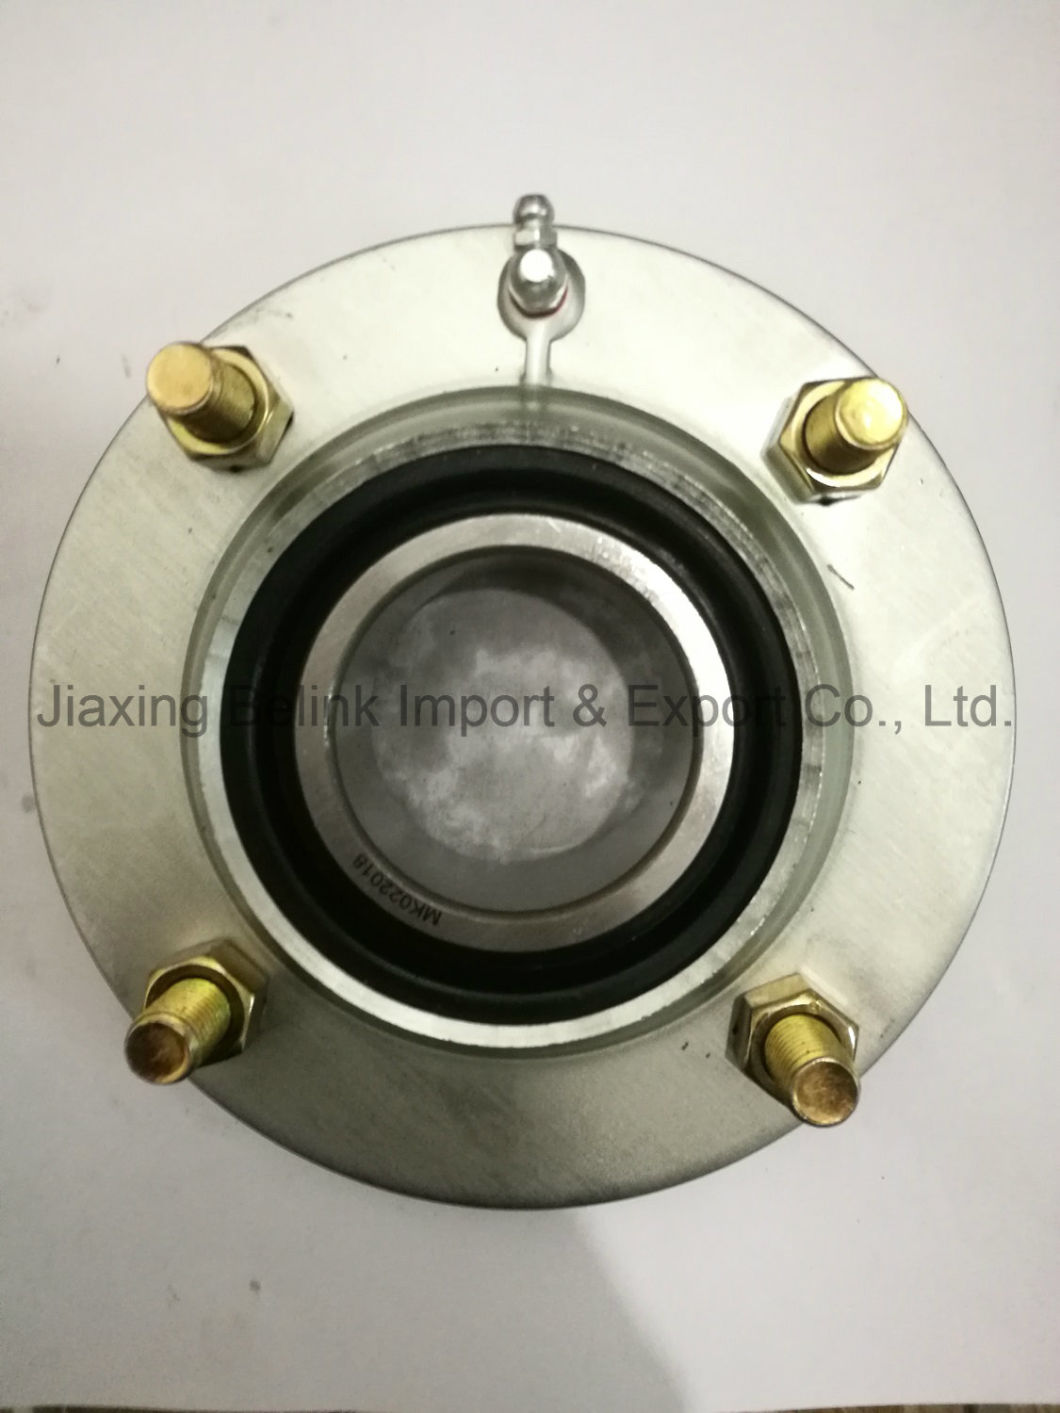 Ap30942 High Quality Round Bore Agricultural Machinery Bearing Housing Hot Sell Relubricable Heavy Duty Farm Machinery Bearing Housing